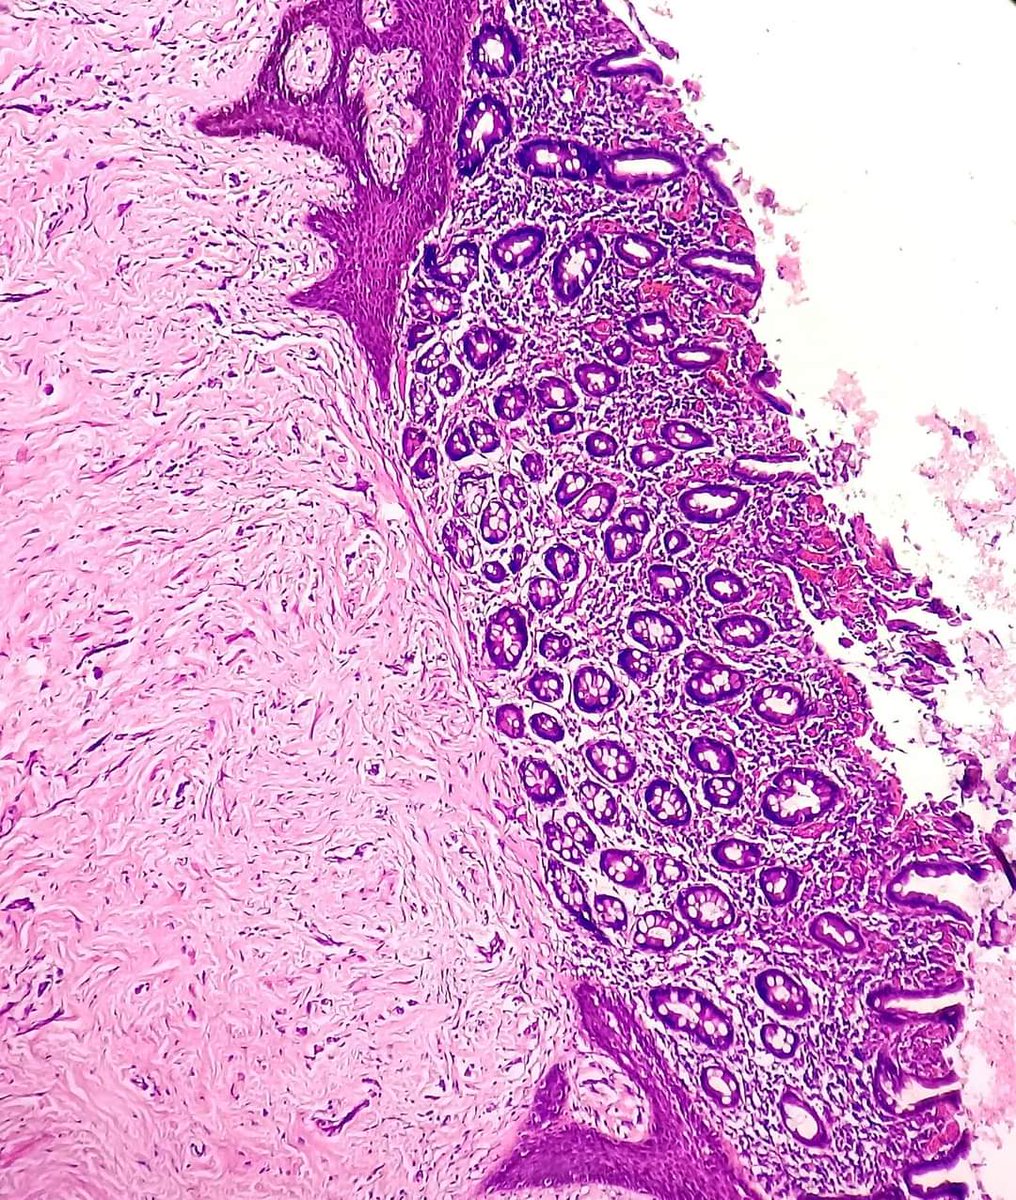 Omphalomesenteric duct(Vitellointestinal duct) remnant presenting as a rubbery skin nodule at the umbilicus of 2 years old child.
#dermpath #dermatology #embryology